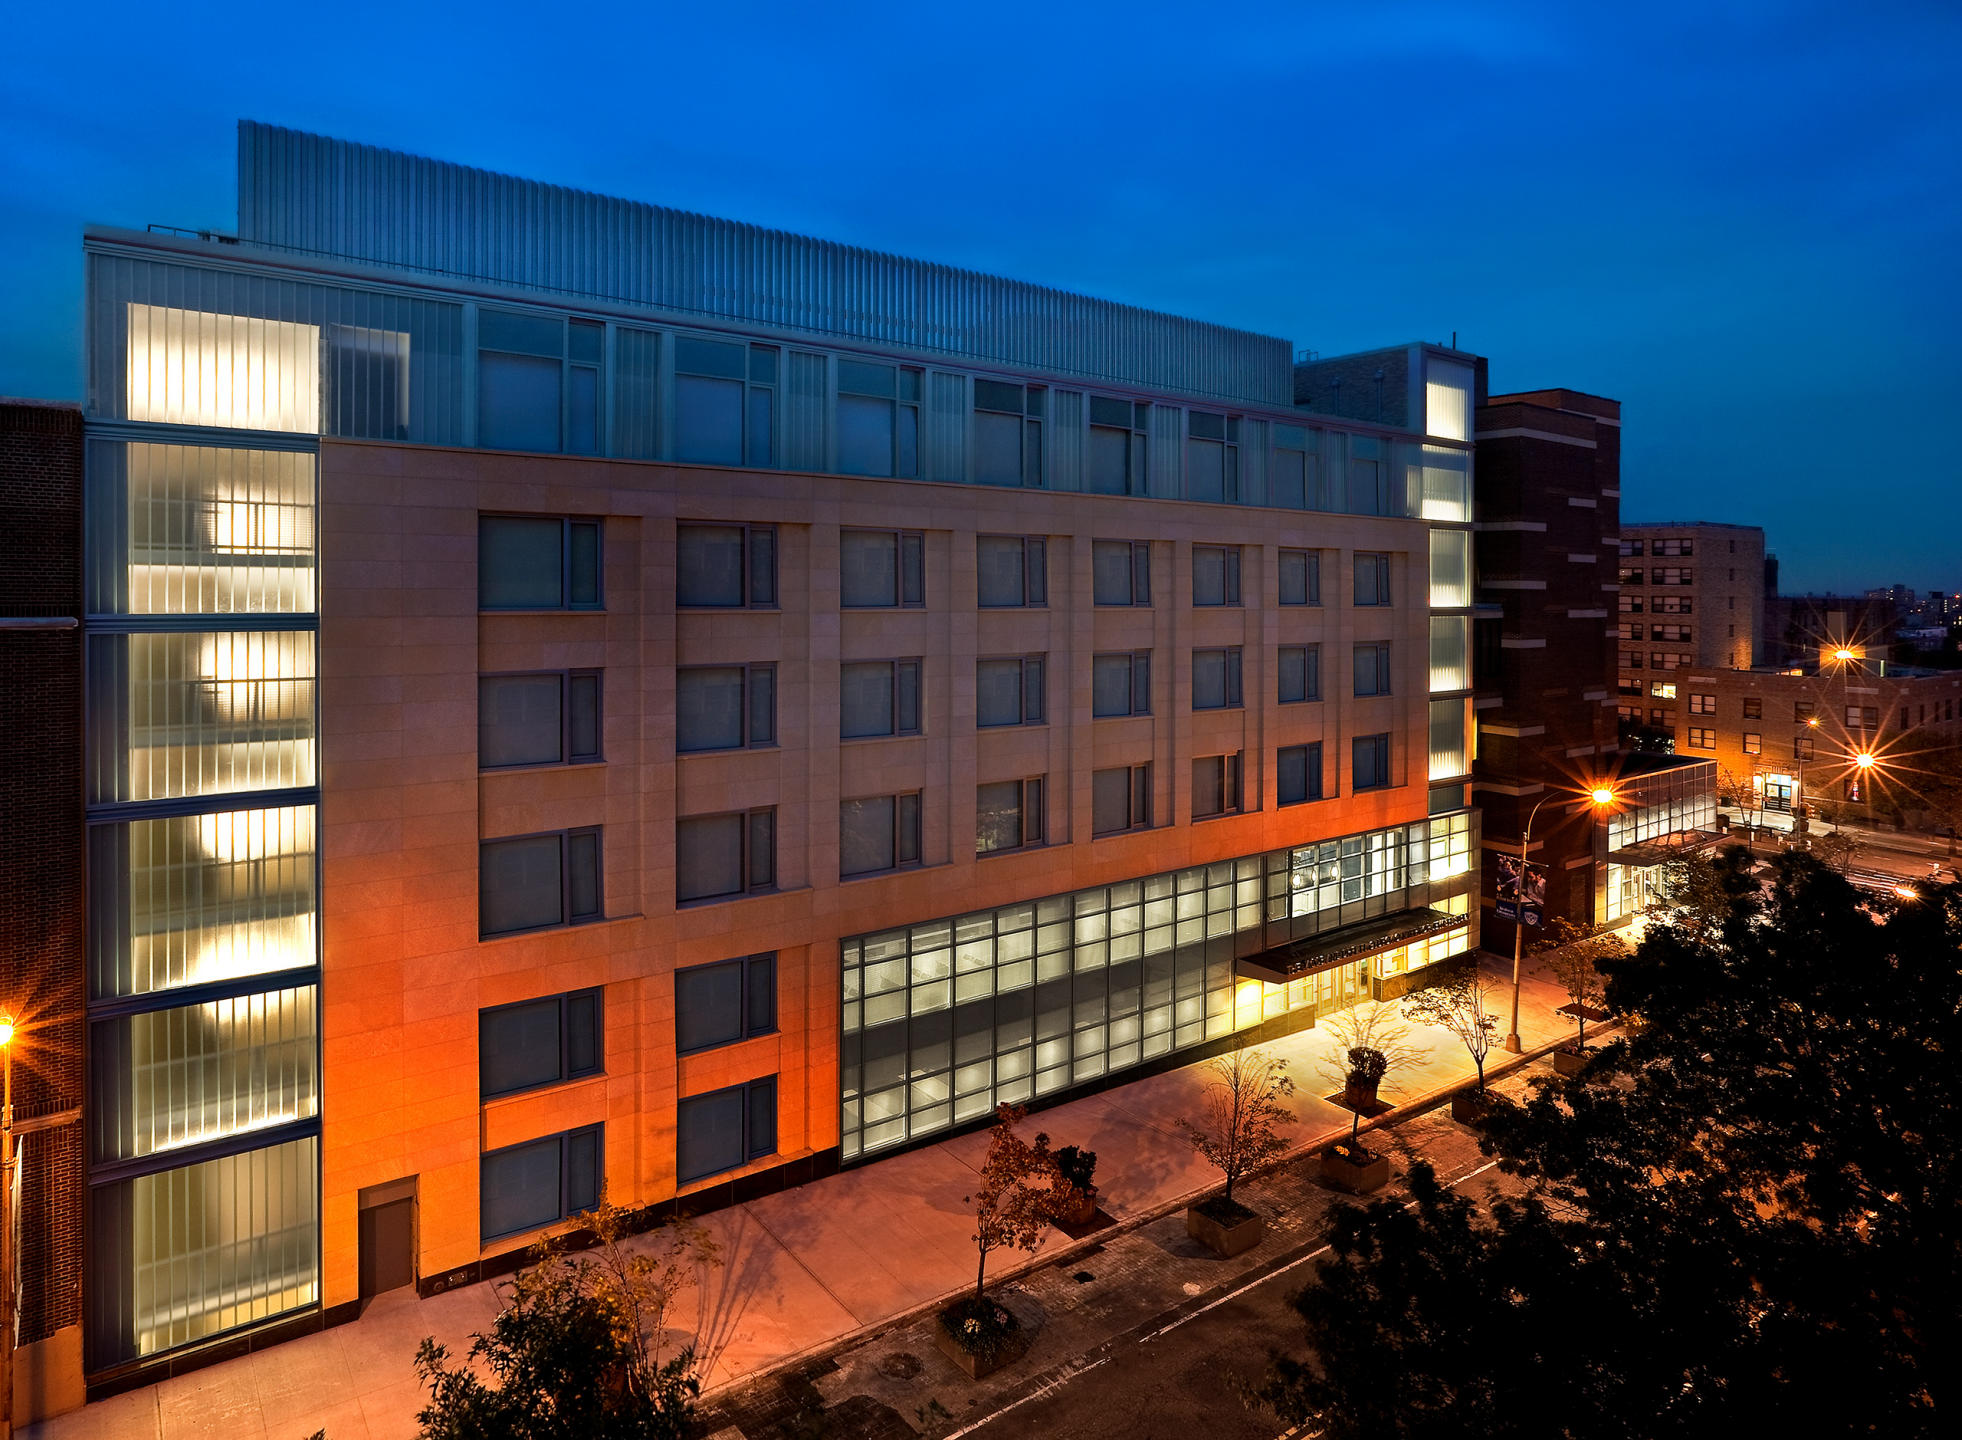 Yeshiva University, NYC twilight photograph of the renovation work by MBI Group, NYC featuring imported glass from Germany : MBI Group NYC : New York NY Architectural Photographer | Interior and Exterior